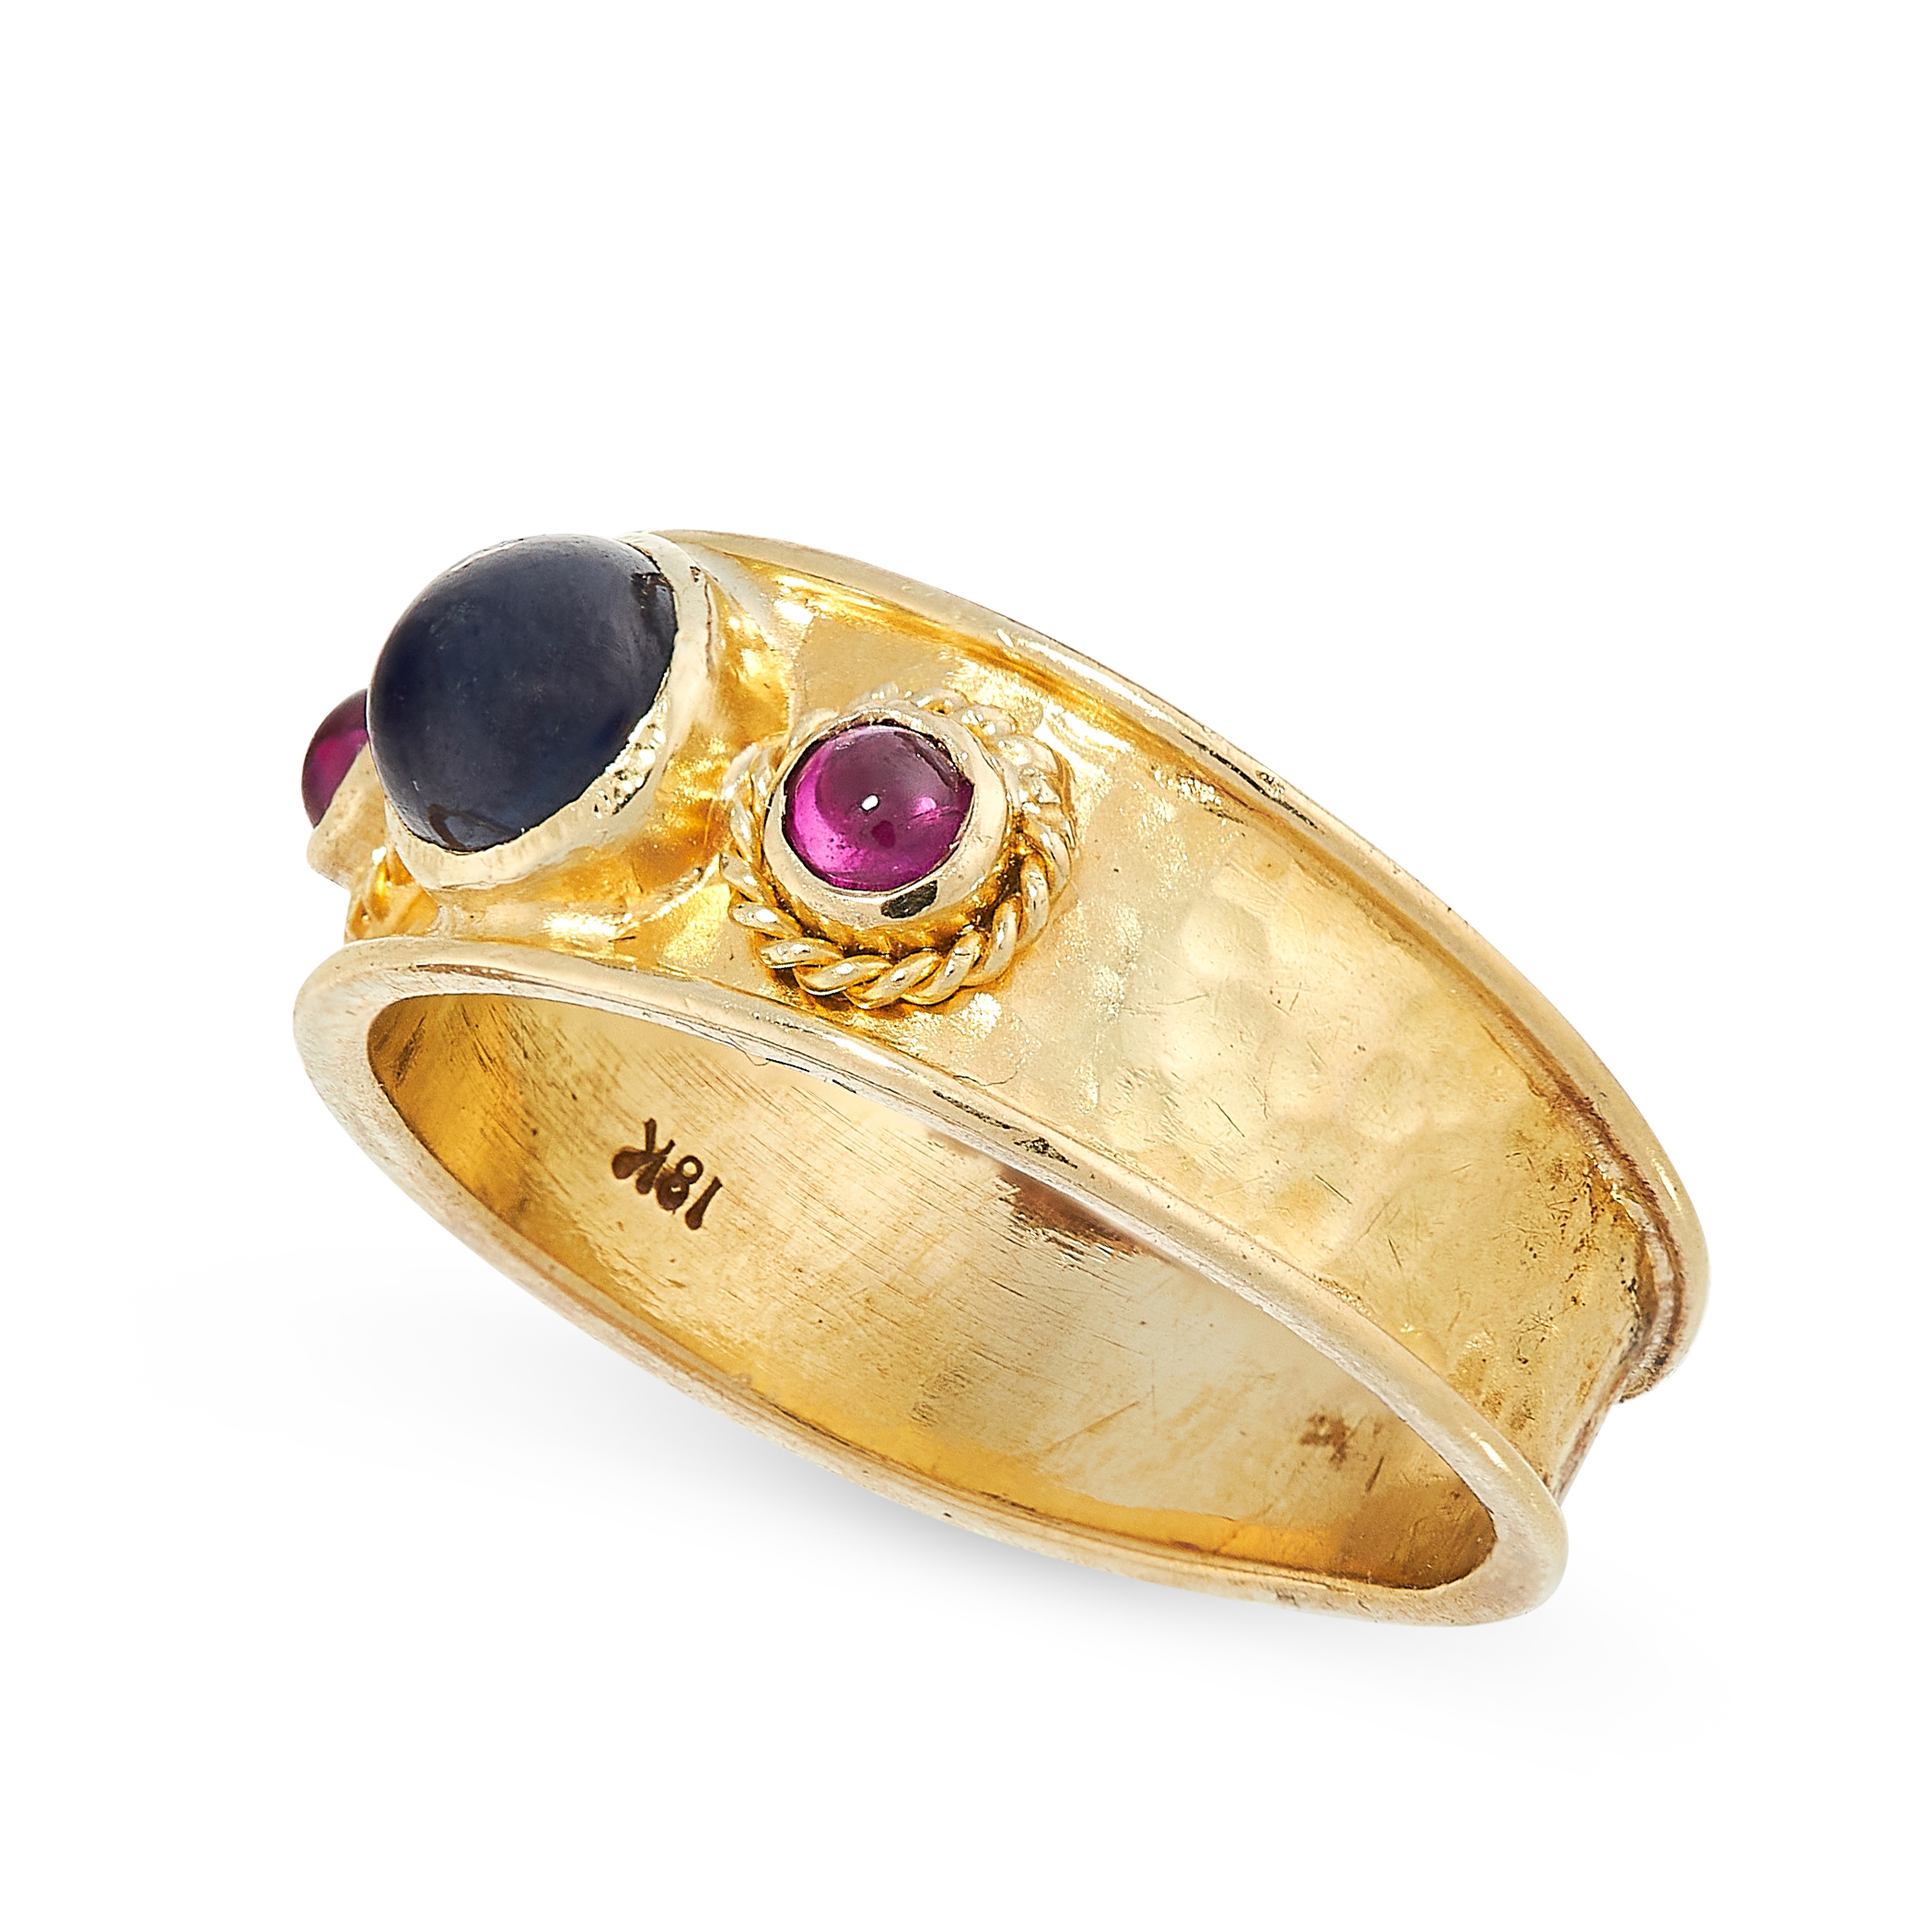 NO RESERVE - A SAPPHIRE AND RUBY RING in 18ct yellow gold, the hammered gold band is set with a - Image 2 of 2